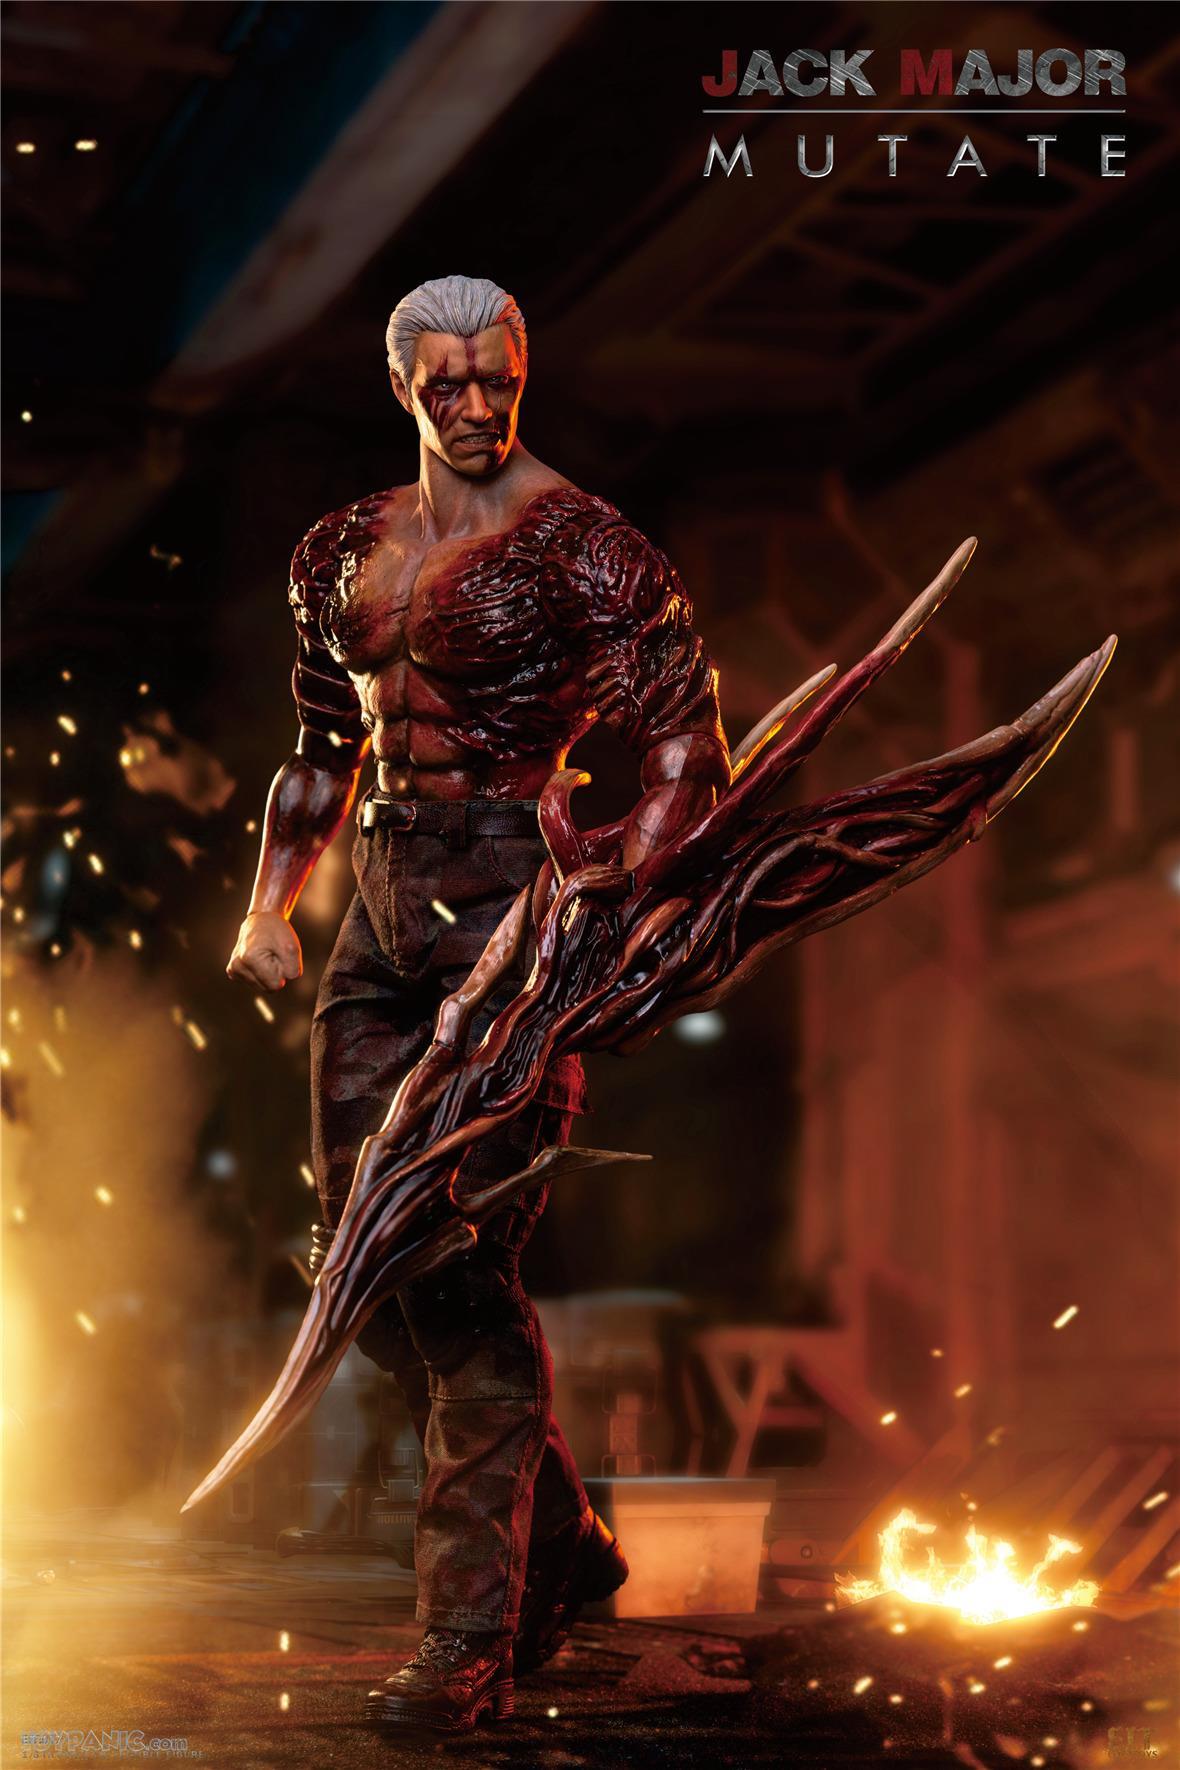 jackmajor - NEW PRODUCT:  1/6 Jack Major Mutate from End I Toys  2732024105950AM_6150423